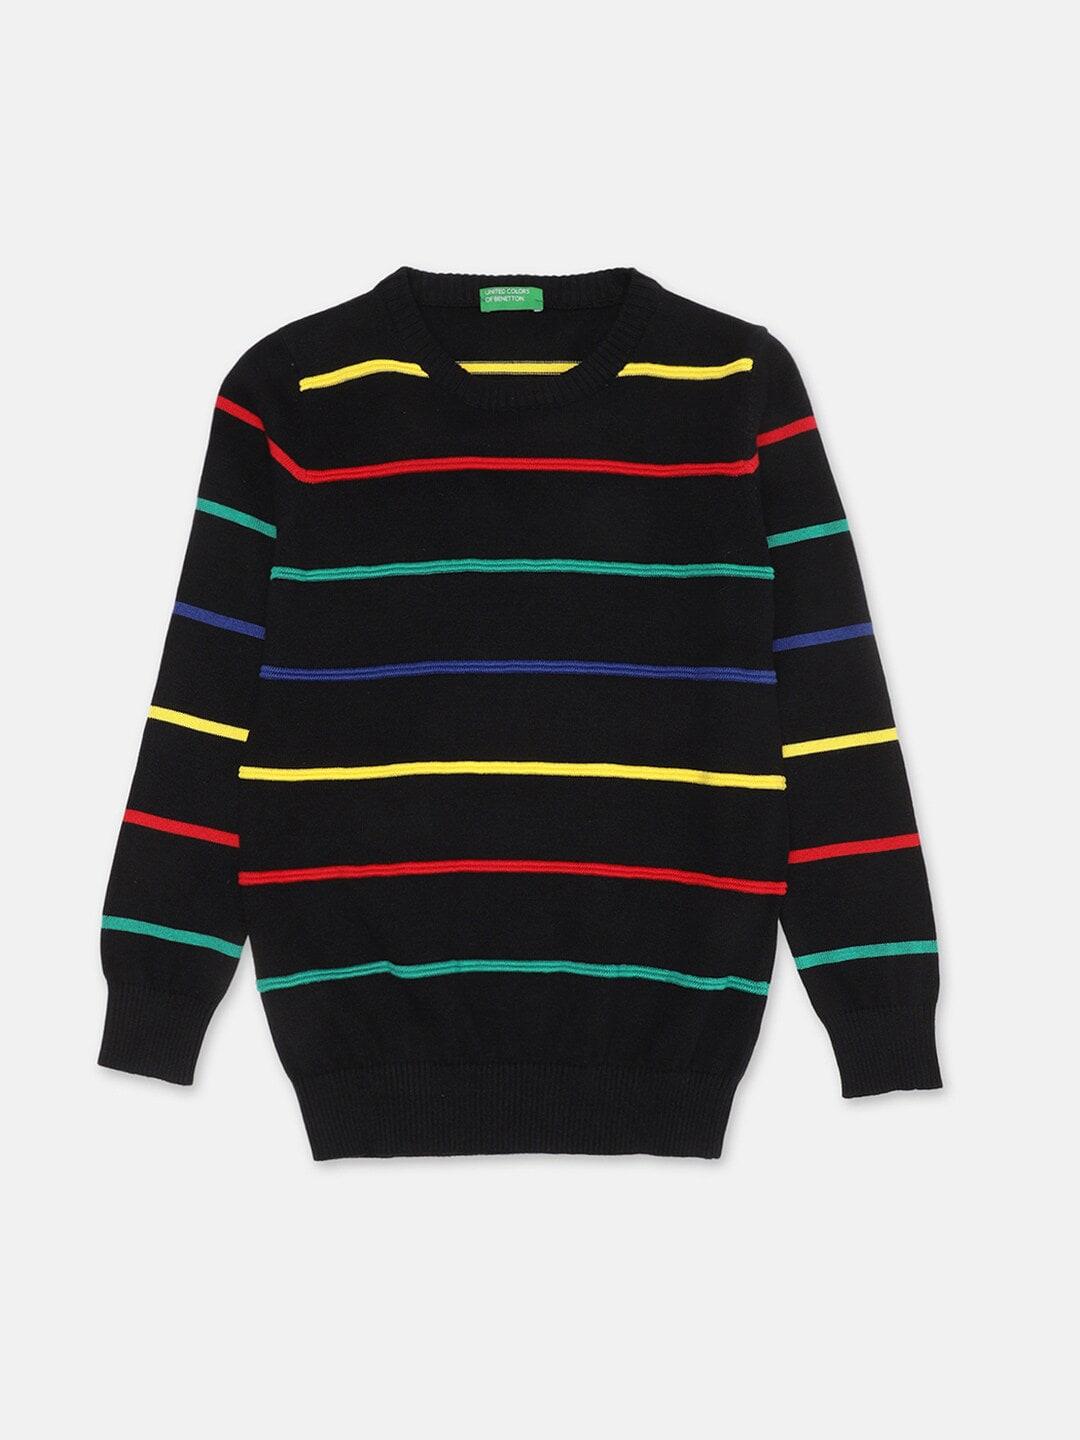 United Colors of Benetton Boys Black & Red Striped Pullover